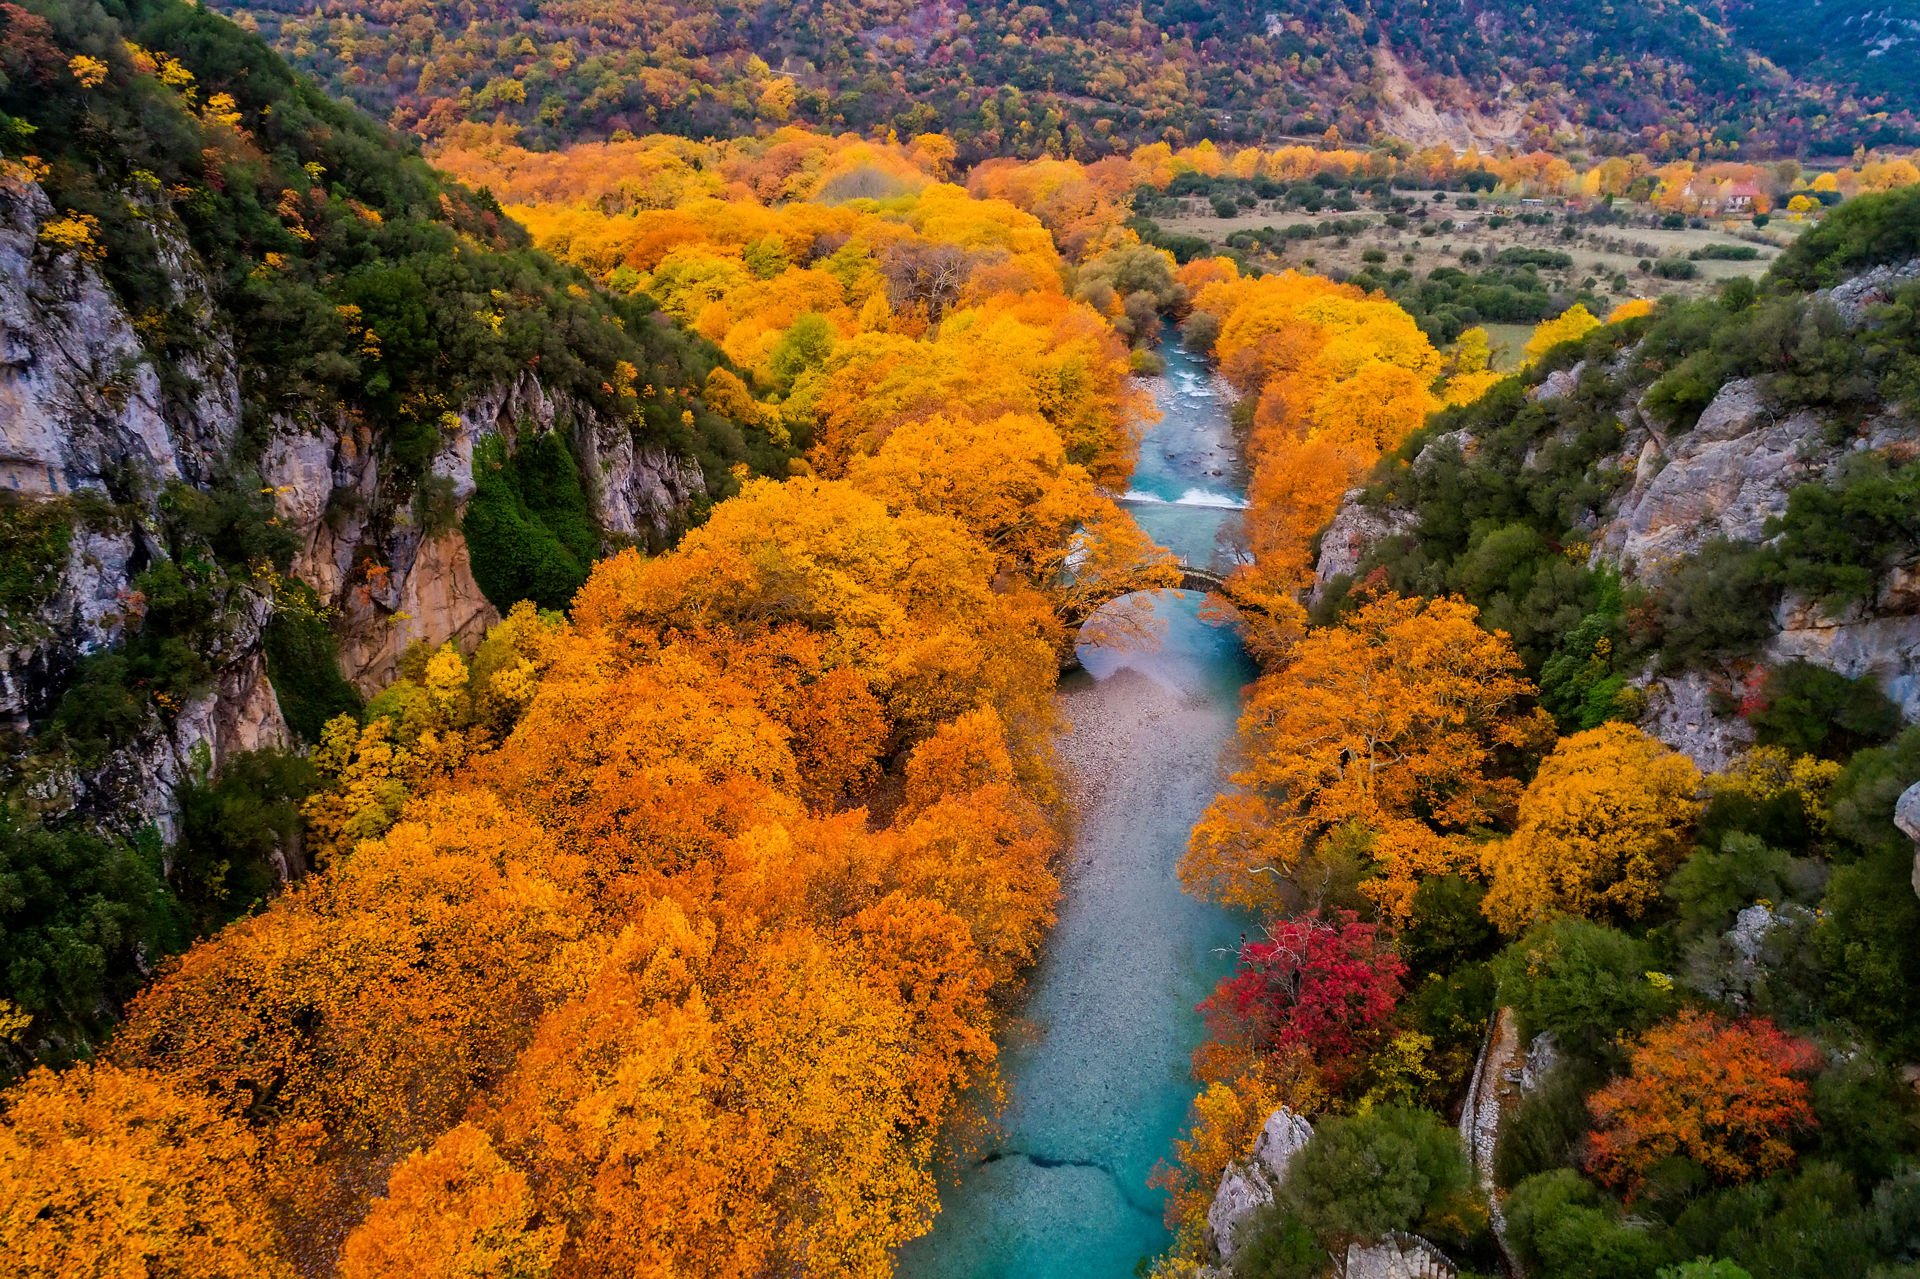 Aerial view of the Old stone bridge in Klidonia Zagoria in the autumn, Epirus, Western Greece. This arch bridge with elongated arch built in 1853.